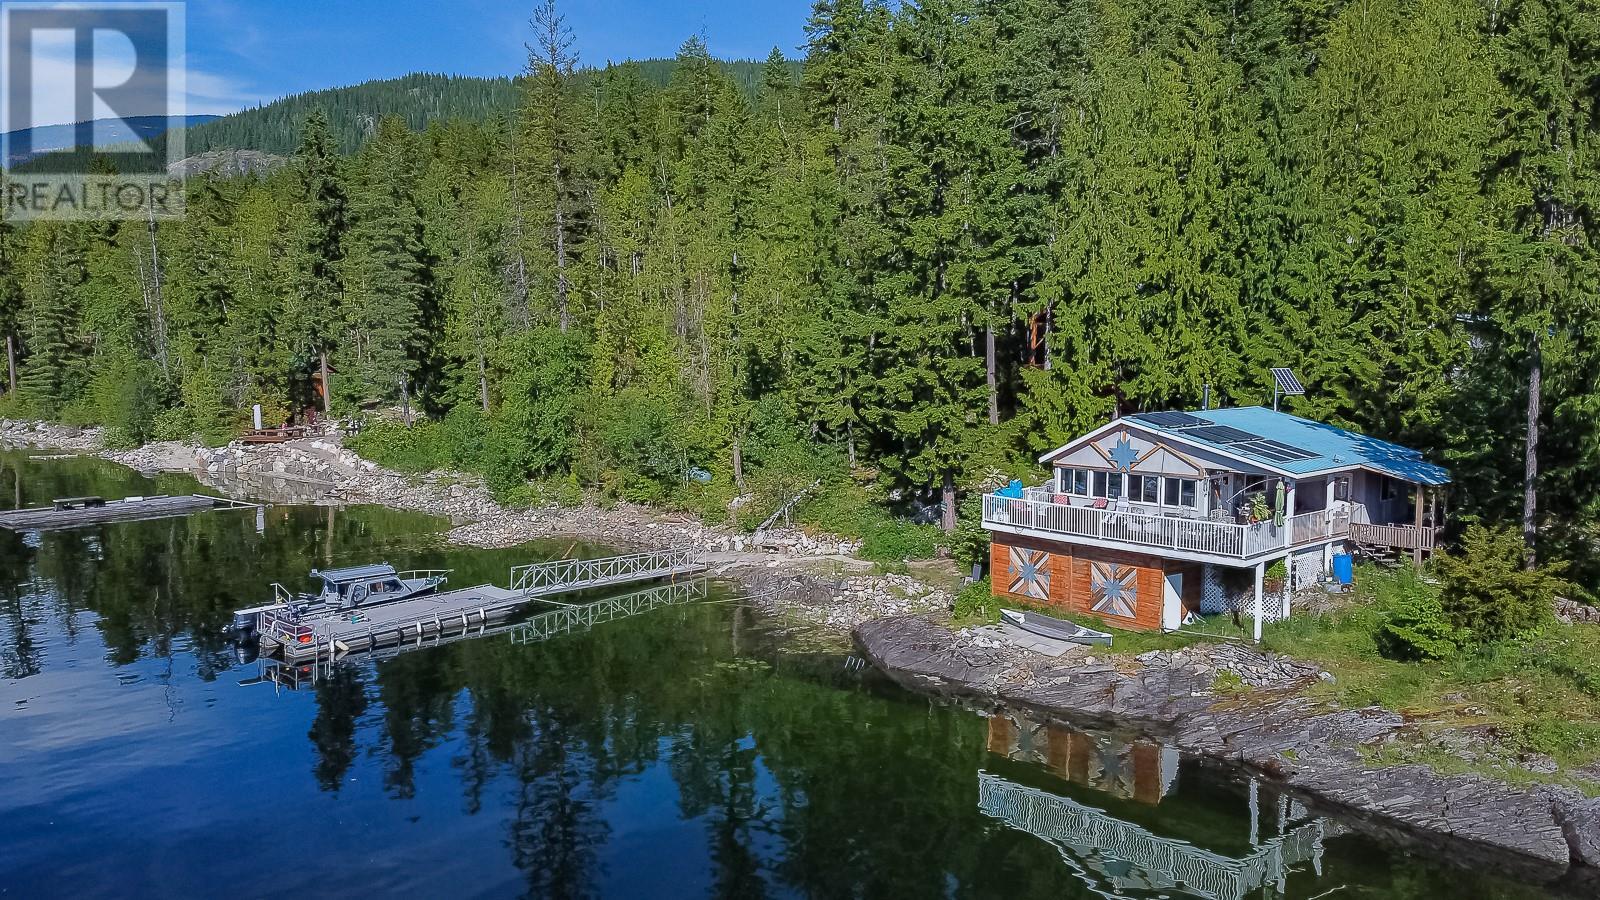 Lot 1 Pete Martin Bay located in Anstey Arm, British Columbia